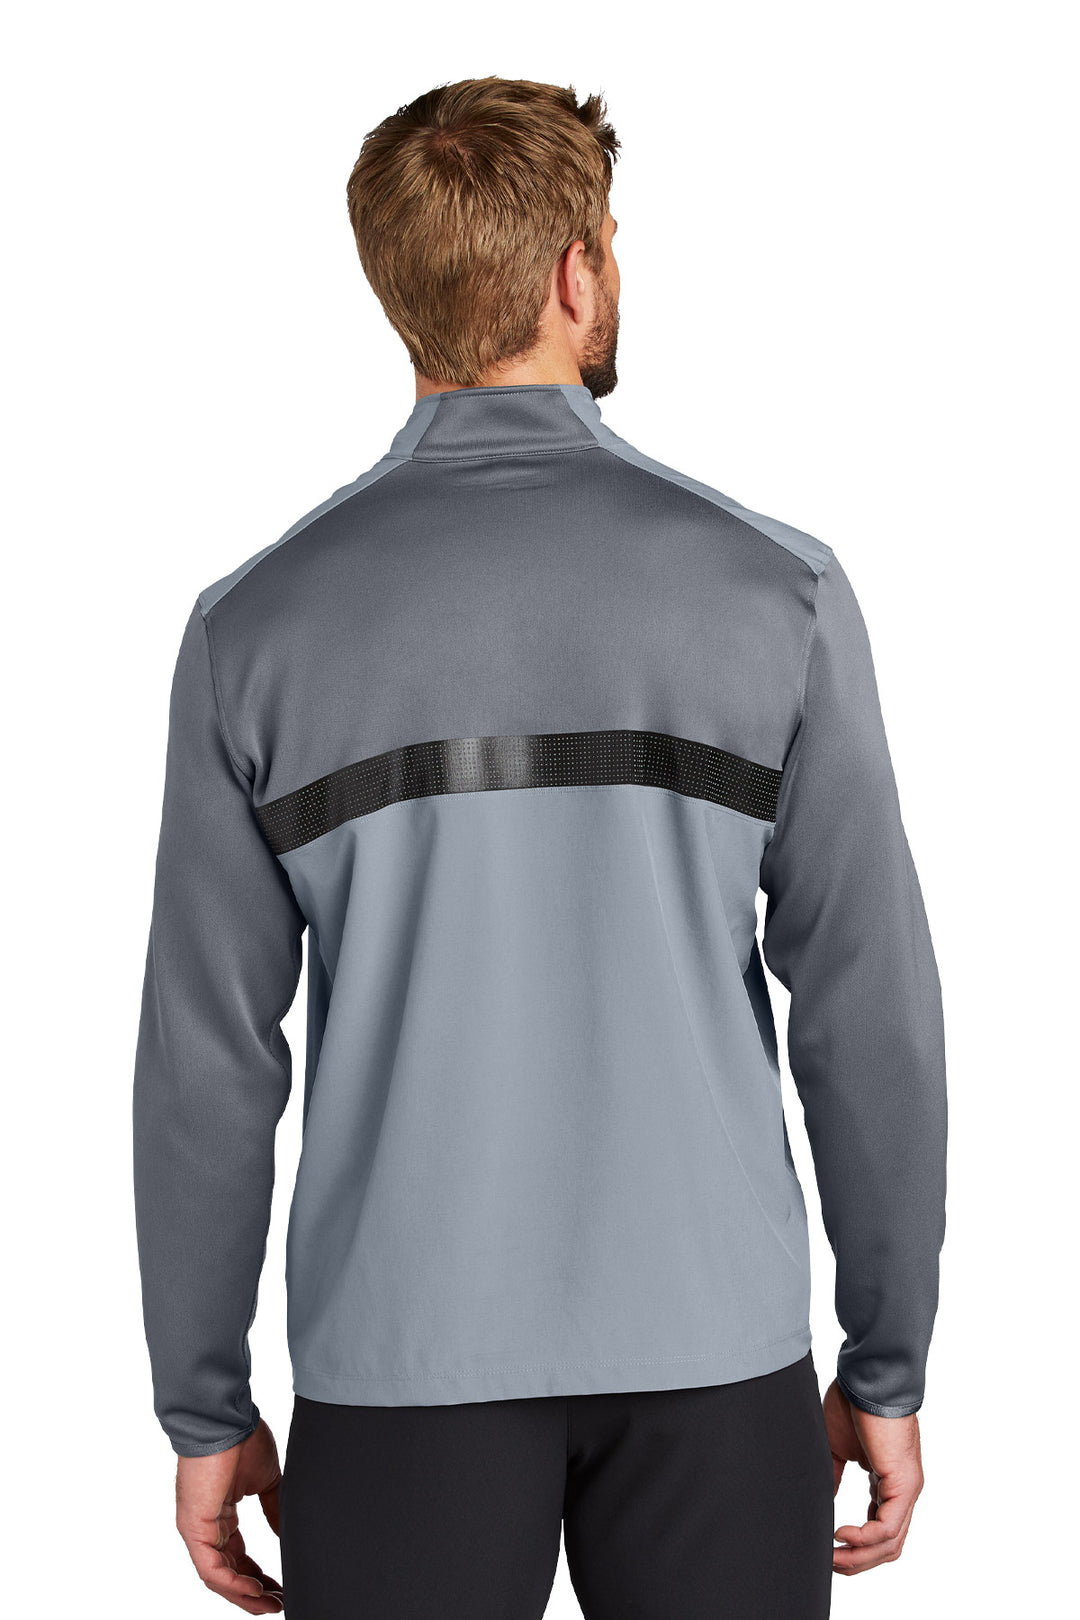 Dri-FIT Fabric Mix 1/2-Zip Cover-Up